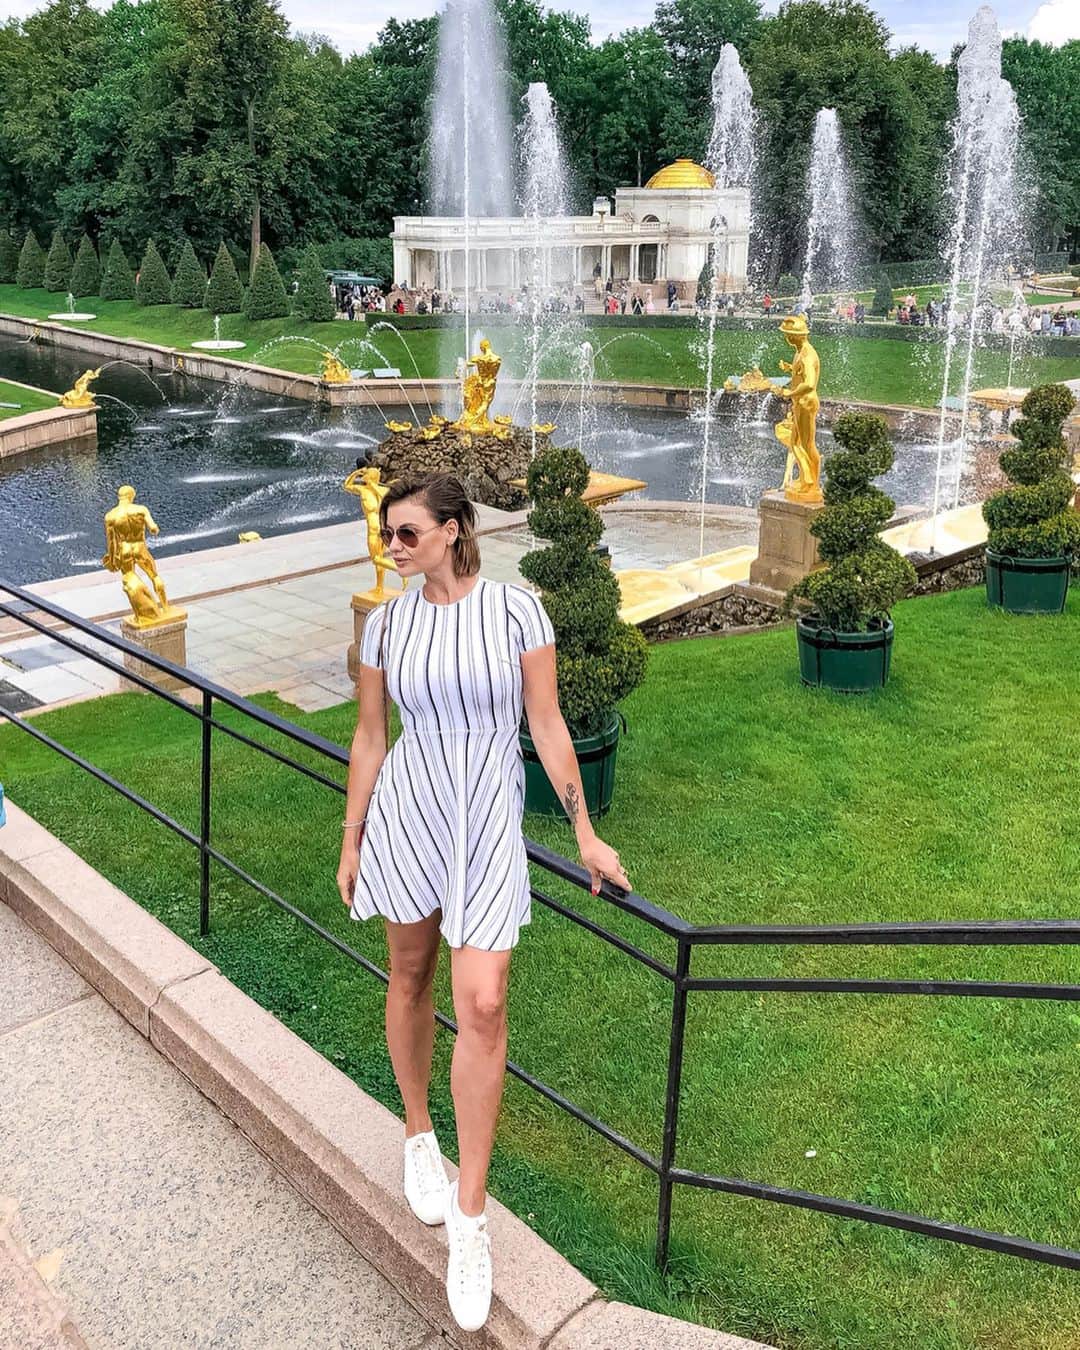 Anna Starodubtsevaさんのインスタグラム写真 - (Anna StarodubtsevaInstagram)「I have to share this place with you guys and you have to visit it one day 😍. ⠀ Welcome to Peterhof, Saint Petersburg where you can find beautiful palaces, gardens and fountains. We call it Russian Versal ,as it was commissioned by Peter the Great as a direct response to the Palace of Versailles. ⠀ ⠀ I have traveled a lot and had seen many beautiful places,but this one made my heart stop for a sec. ⠀ It’s my very first time here and I was speechless. It would be very selfish not to tell you guys about it. If you ever visit St.Petersburg you have to include this spot in your itinerary, I promise you won’t regret 💞😃. ⠀ 🇷🇺🇷🇺🇷🇺. ⠀ Петергоф заставил мое сердце остановиться на мгновение 😍. ⠀ Такой красоты я увидеть не ожидала. Это,однозначно, одно из самых красивых и запоминающихся мест в моем списке. ⠀ Погода была шикарная до тех пор пока не ливанул дождь и пришлось стоять под деревом ибо зонта то нет конечно же 😂, зачем он в Питере 🤷‍♀️.Однако,в тот момент он был и не нужен,ибо это был безумно романтичный момент,когда пережидаешь дождь под деревом, и мокрый насквозь и улыбка на лице, а потом, когда дождь закончился, ты смотришь на воду а там невероятной красноты радуга и ты ещё больше улыбаешься и просто хорошо... и захотелось остановить время и побыть там ещё чуток... ⠀ #anyastar_путешествия #путешествия #люблюпутешествовать #travel #lovetotravel #livetotravel #traveltheworld #travelwithme」8月13日 18時38分 - anyastar